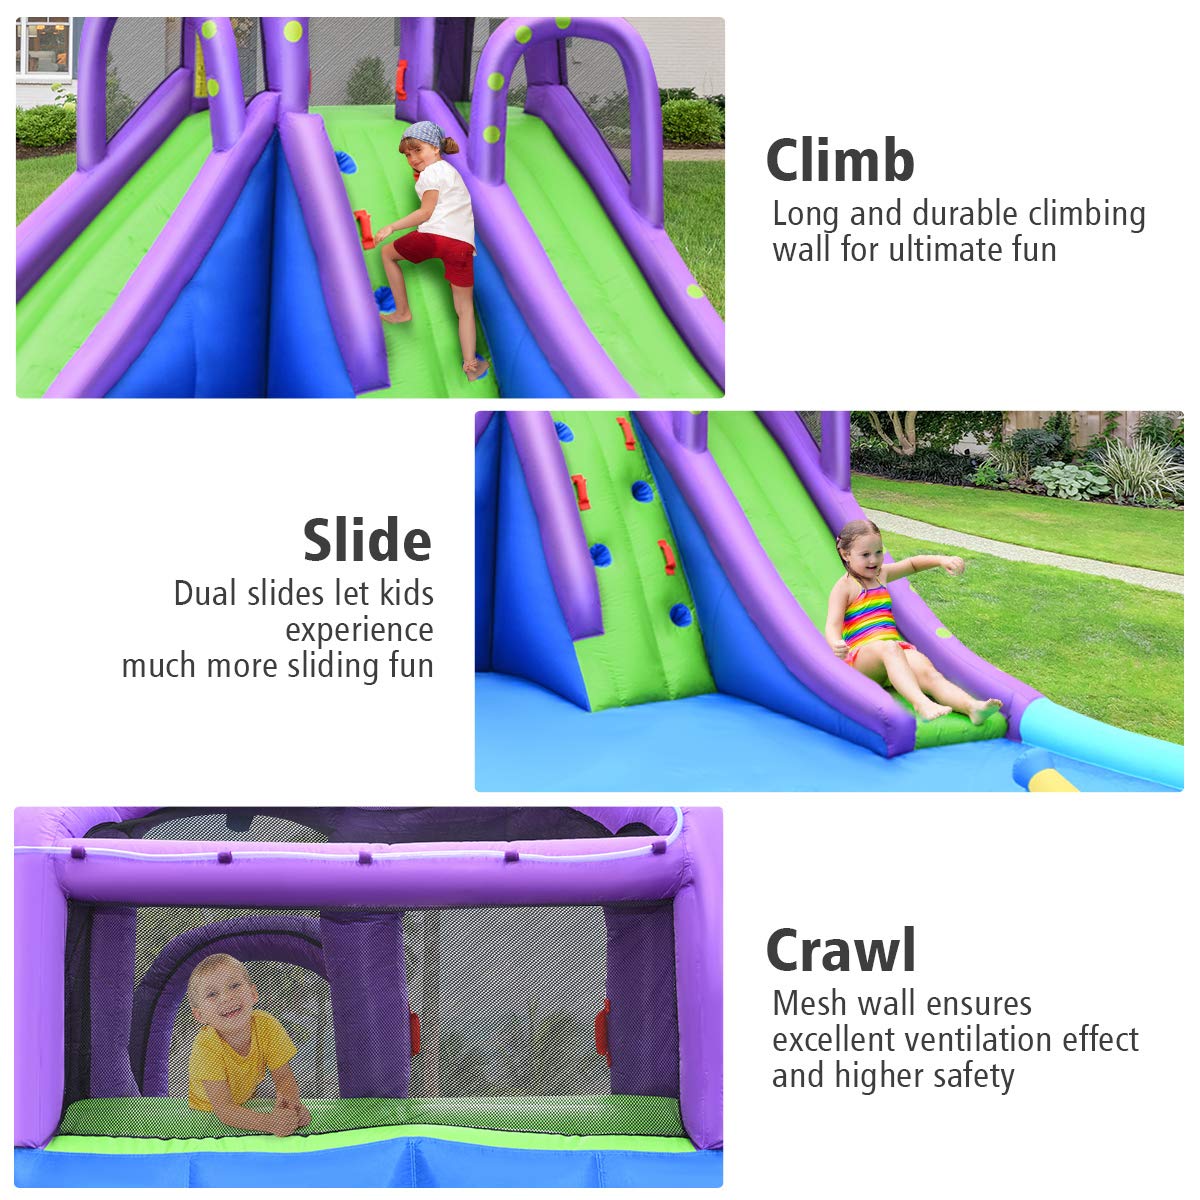 BOUNTECH Inflatable Water Slide, Giant Waterslide Park for Outdoor Fun with 2 Long Slides, Splash Pool, 780w Blower, Climbing, Blow up Water Slides Inflatables for Kids and Adults Backyard Party Gifts Octopus with 780w Air Blower